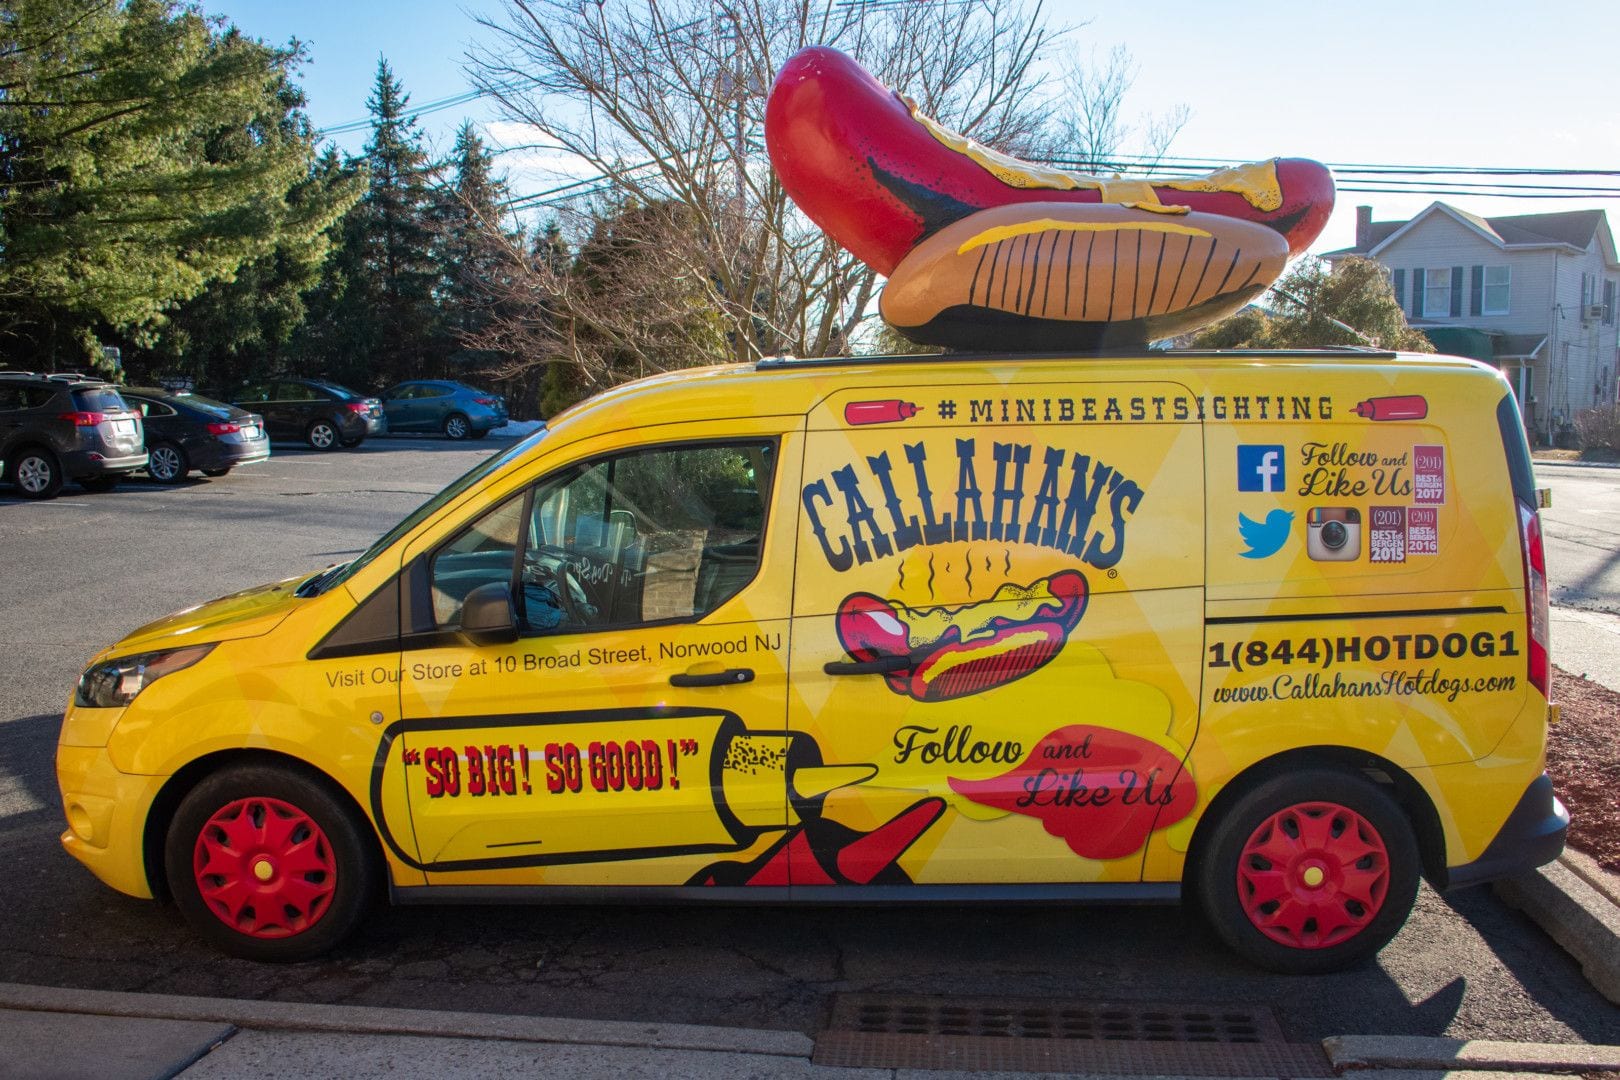 Callahan's Food Truck, one of the Best New Jersey Food Trucks